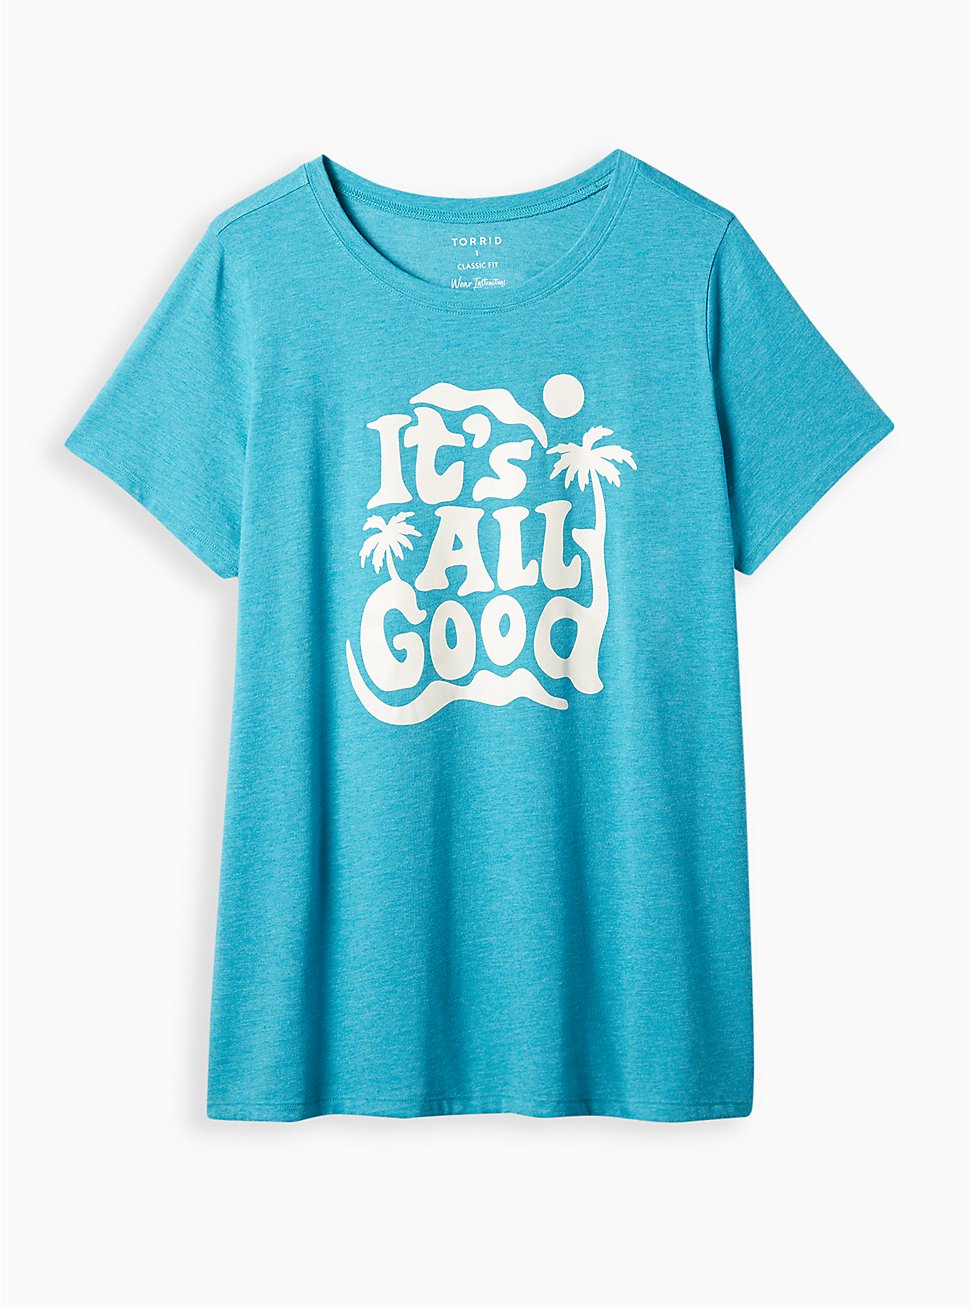 Everyday Tee - Signature Jersey All Good Teal Blue, ENAMEL BLUE, hi-res